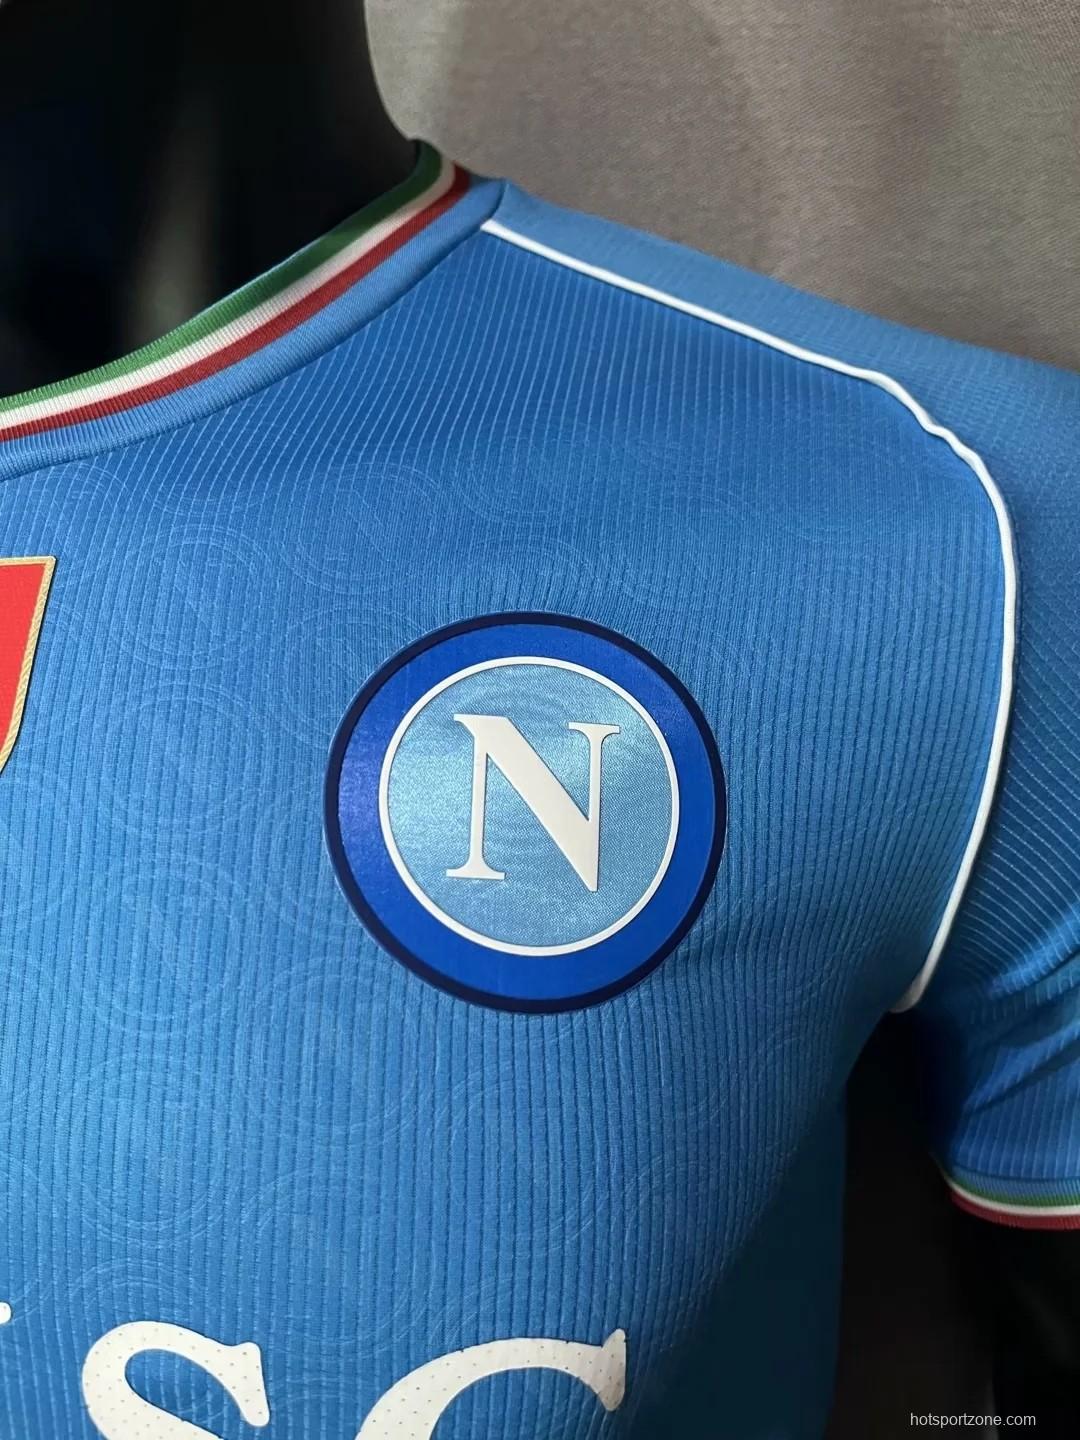 Player Version 23/24 Napoli Home Jersey